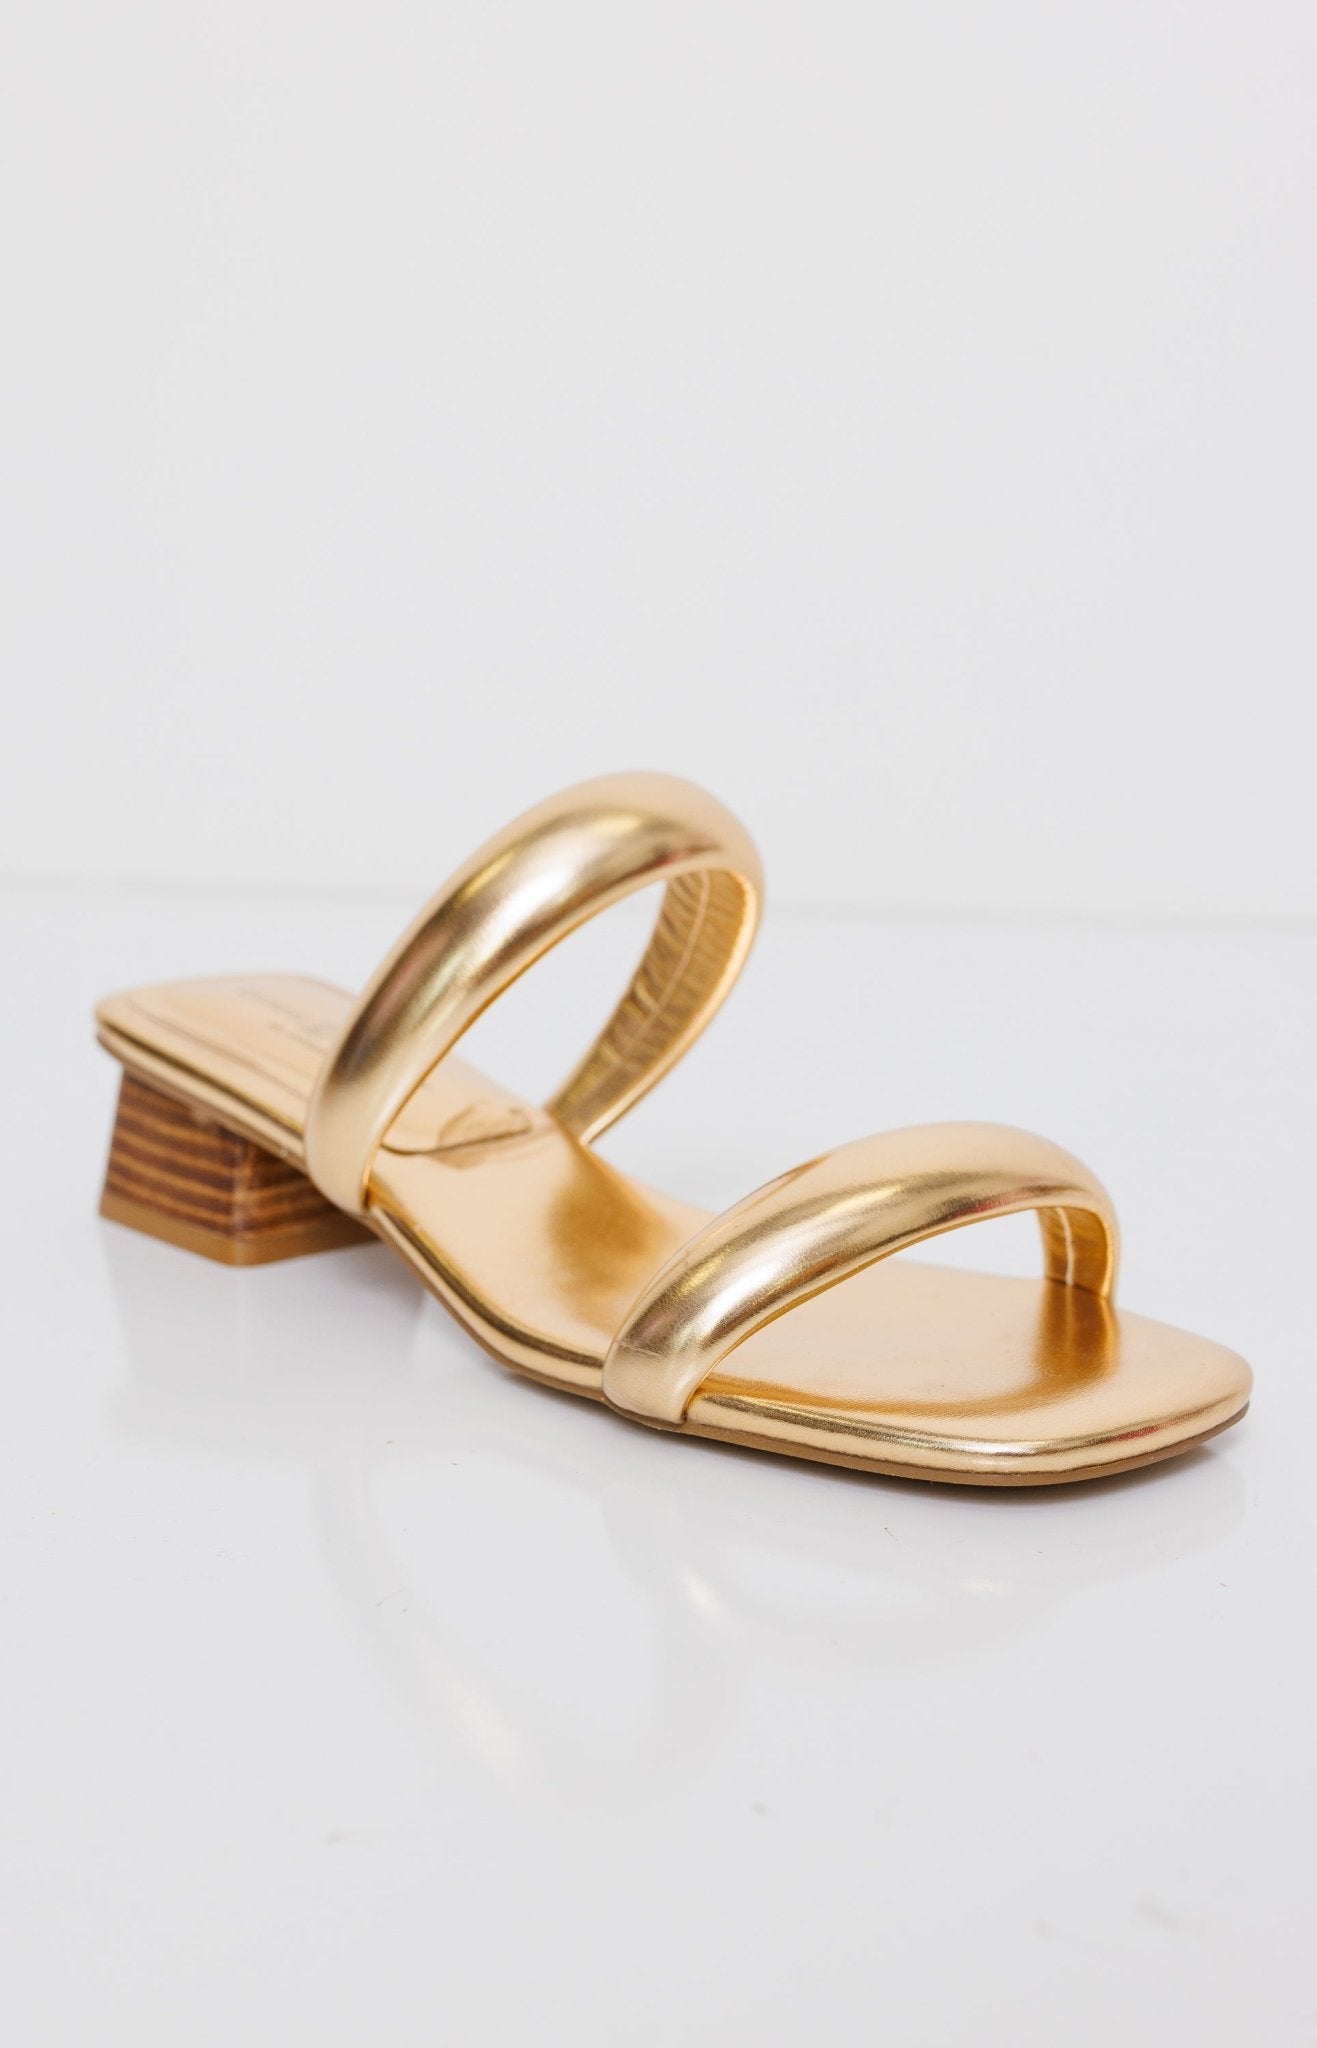 Image of Chinese Laundry: Alistair Dress Slide, GOLD